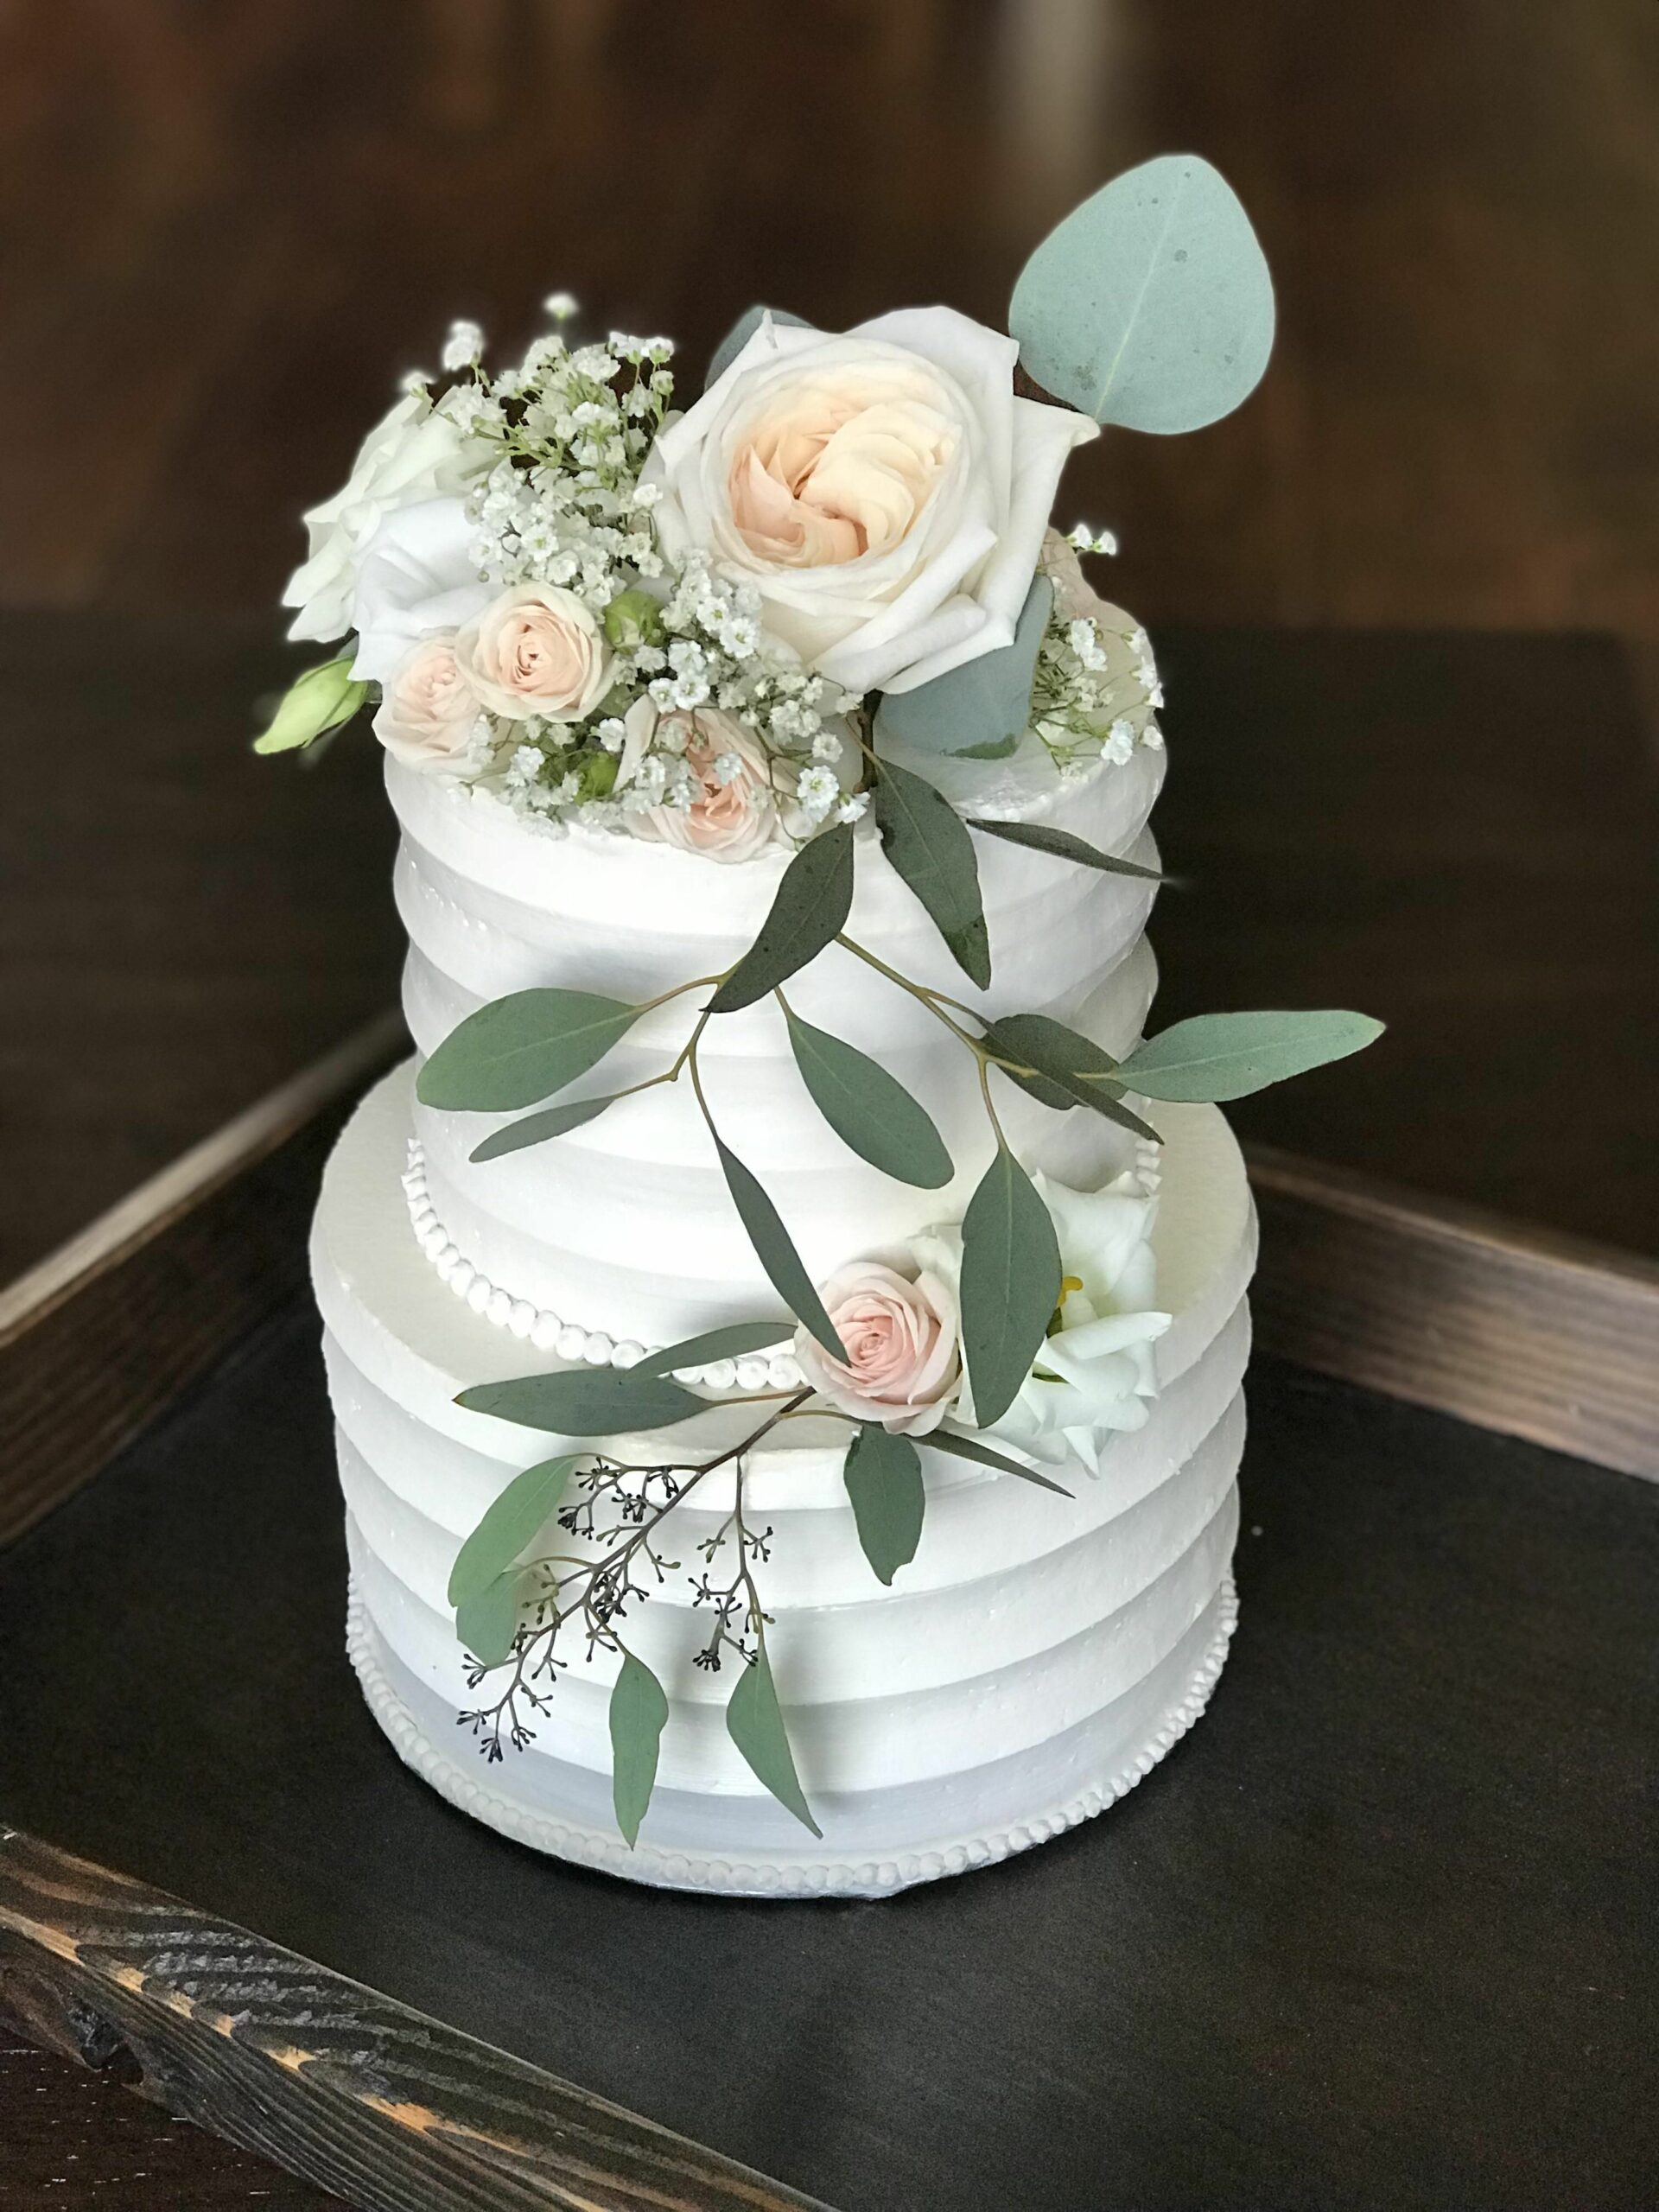 [homemade] two tier wedding cake with fresh florals Food Recipes | Wedding cakes with flowers ...